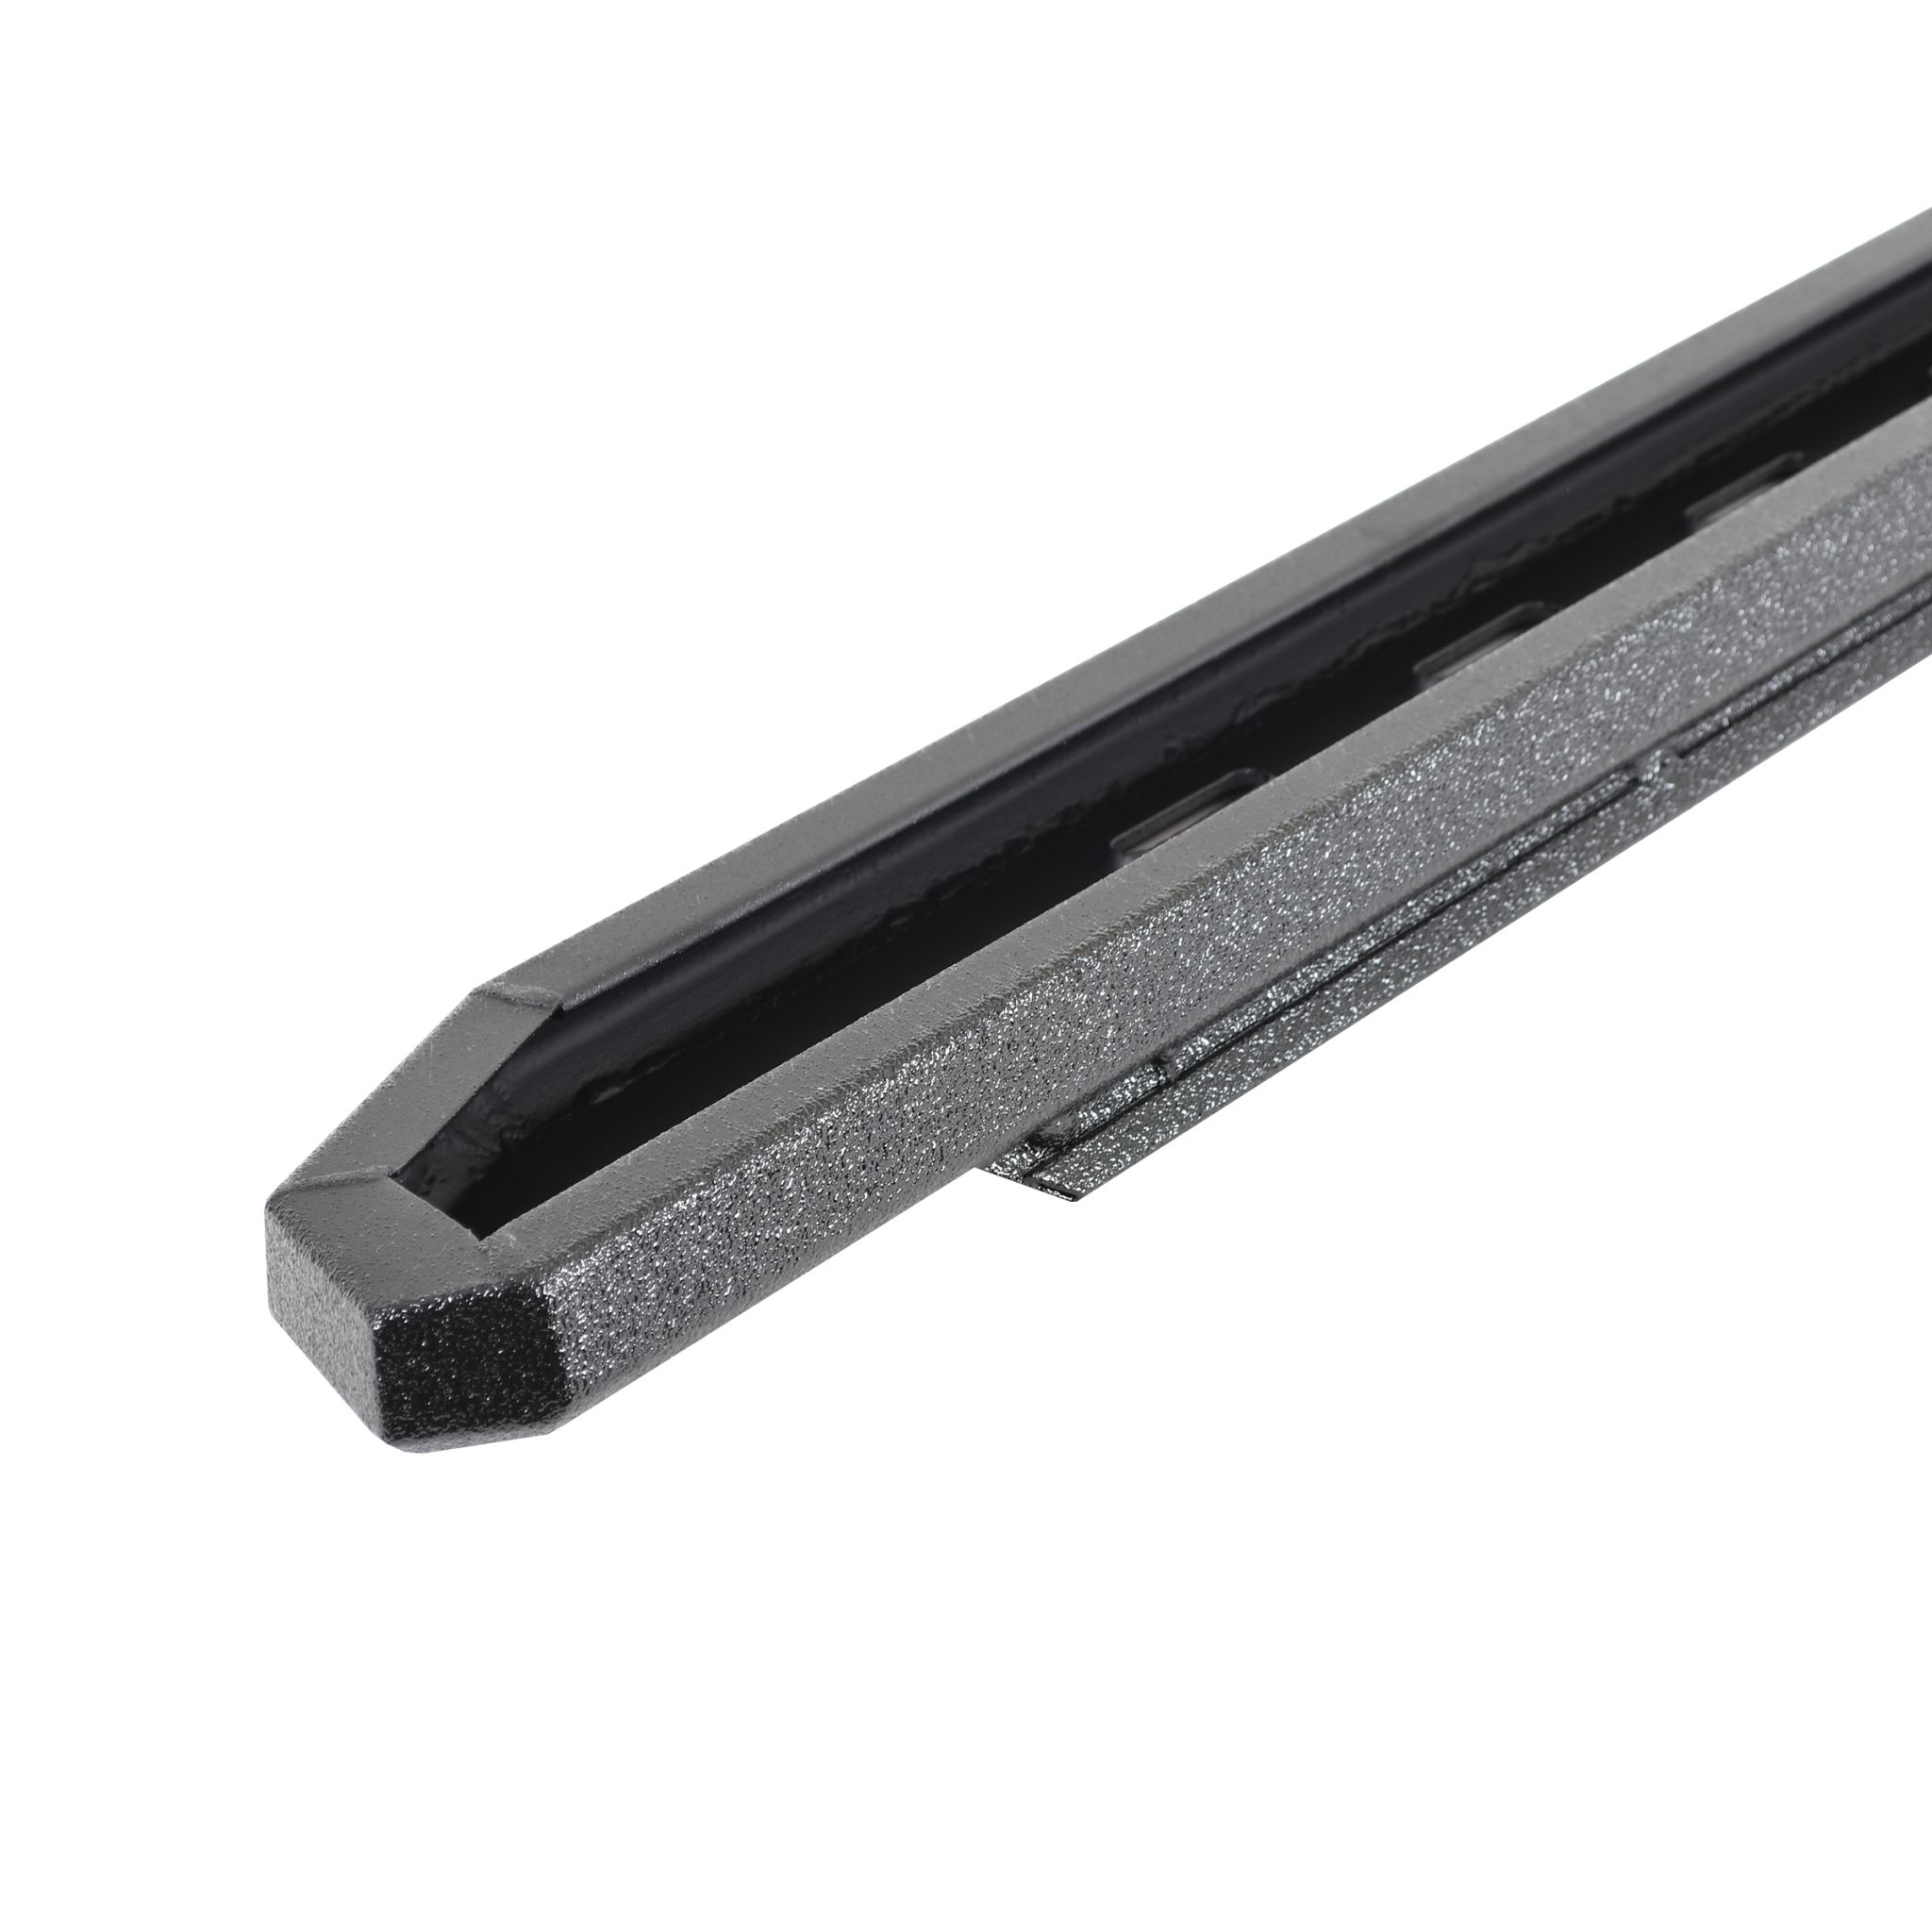 Go Rhino 69604887ST - RB30 Slim Line Running Boards with Mounting Bracket Kit - Protective Bedliner Coating